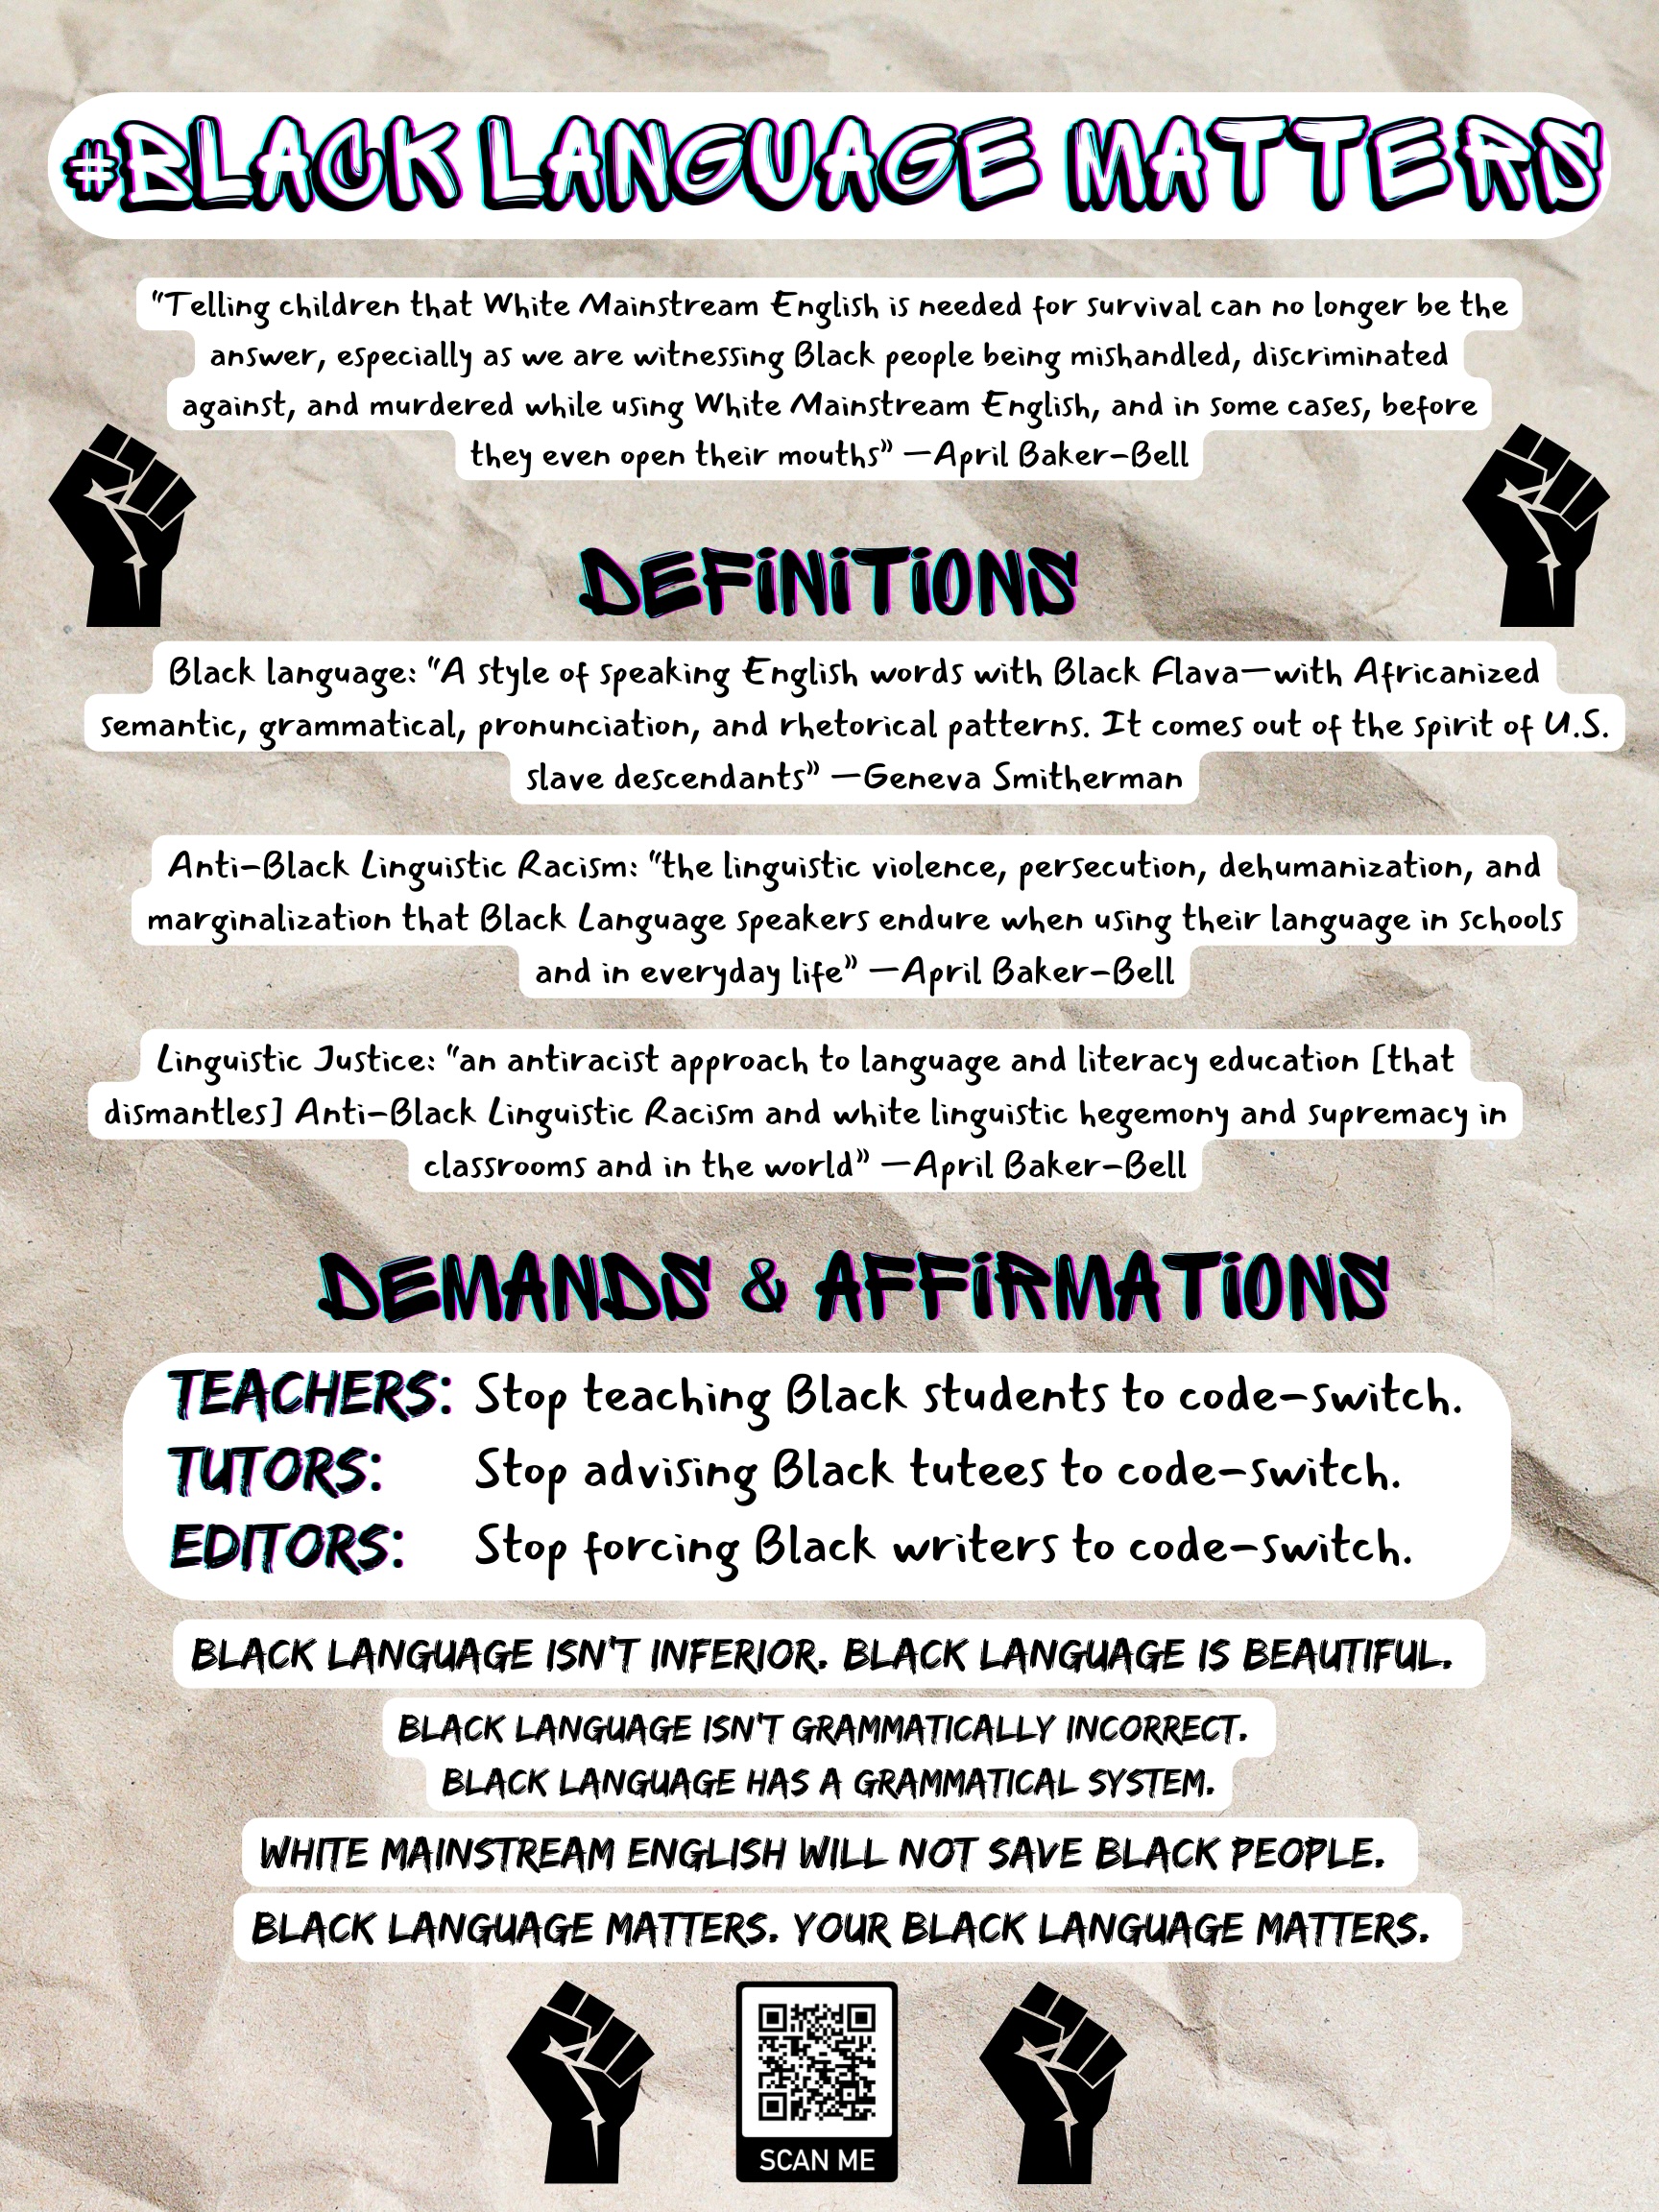 Figure 1. Flyer with light brown background and black text over white boxes. The flyer reads: "#BlackLanguageMatters. “Telling children that White Mainstream English is needed for survival can no longer be the answer, especially as we are witnessing Black people being mishandled, discriminated against, and murdered while using White Mainstream English, and in some cases, before they even open their mouths” —April Baker-Bell. Black language: “A style of speaking English words with Black Flava—with Africanized semantic, grammatical, pronunciation, and rhetorical patterns. It comes out of the spirit of U.S. slave descendants” —Geneva Smitherman. Anti-Black Linguistic Racism: “the linguistic violence, persecution, dehumanization, and marginalization that Black Language speakers endure when using their language in schools and in everyday life” —April Baker-Bell. Linguistic Justice: “an antiracist approach to language and literacy education [that dismantles] Anti-Black Linguistic Racism and white linguistic hegemony and supremacy in classrooms and in the world” —April Baker-Bell. Teachers: Stop teaching Black students to code-switch. Tutors: Stop advising Black tutees to code-switch. Editors: Stop forcing Black writers to code-switch. Black language isn’t inferior. Black language is beautiful. Black language isn’t grammatically incorrect. Black language has a grammatical system. White Mainstream English will not save Black people. Black language matters. Your Black language matters."